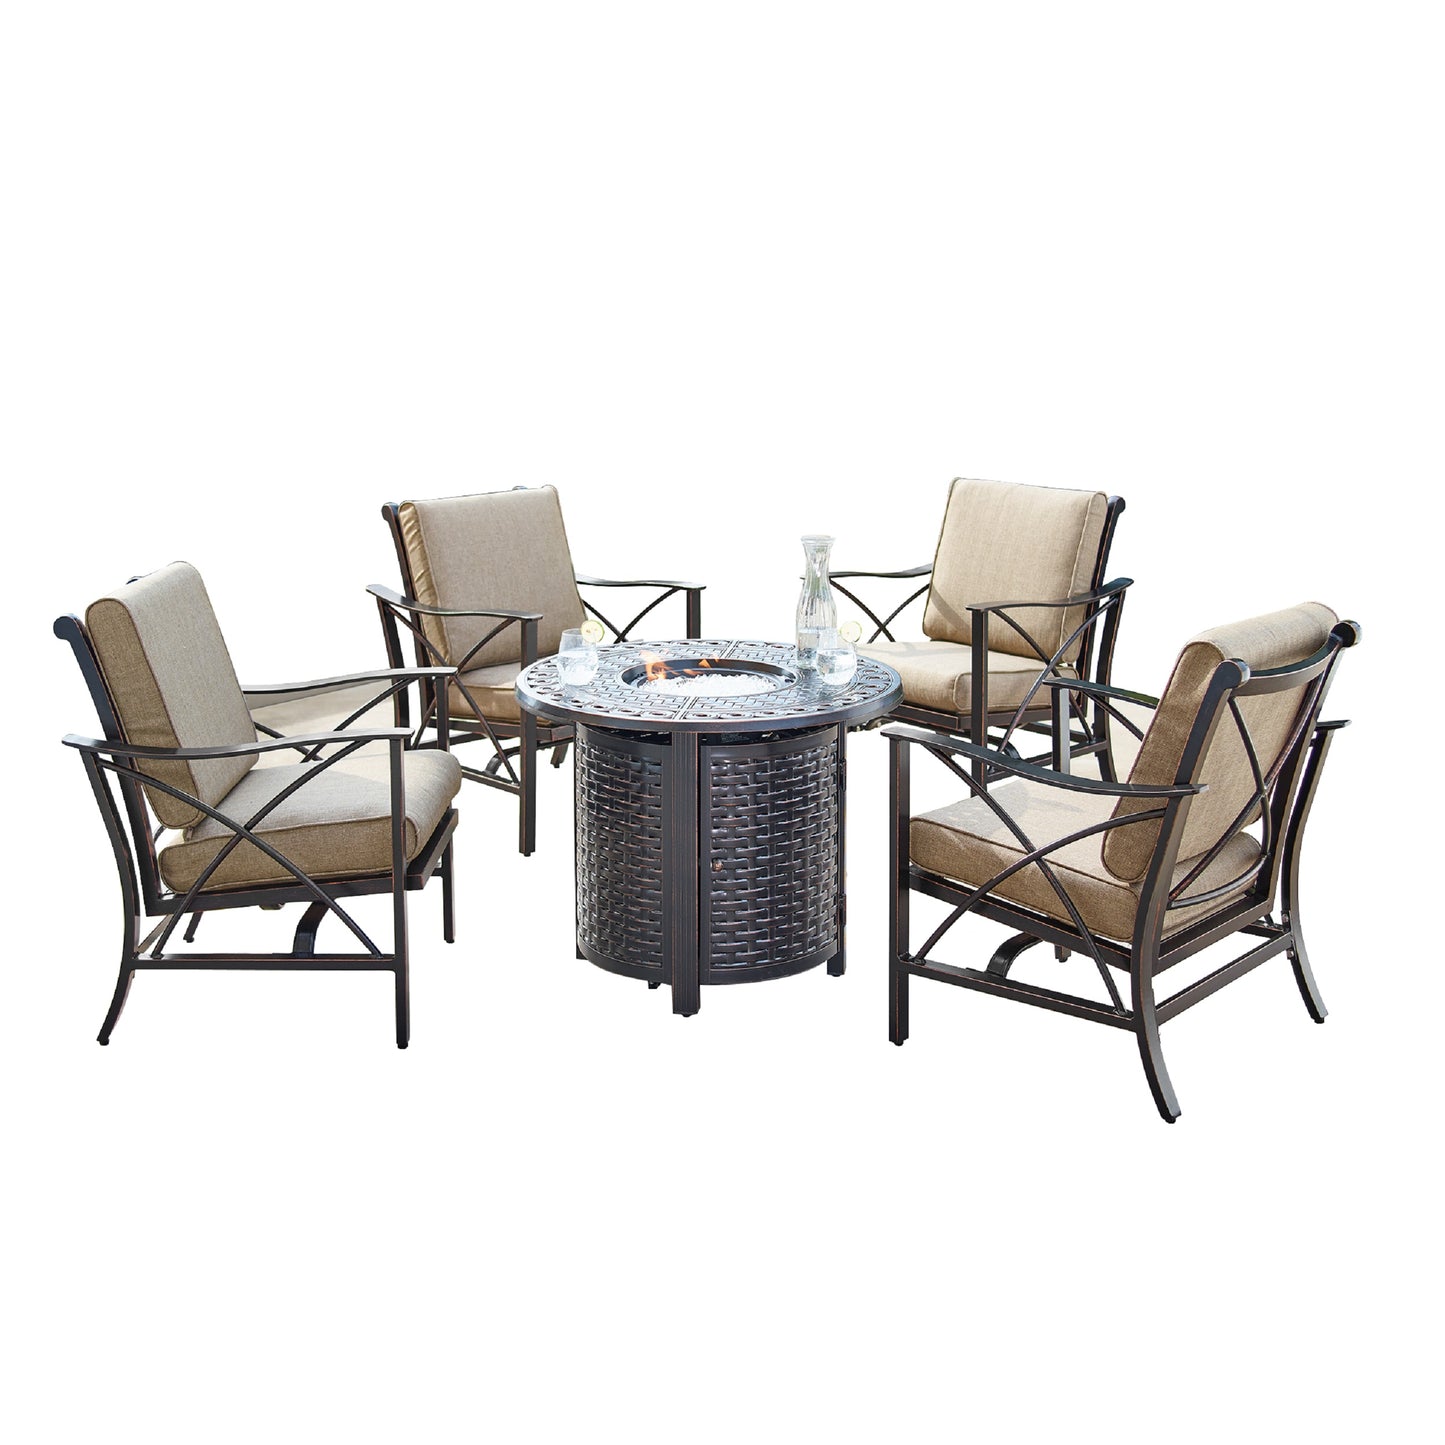 Aluminum 34-in Round Antique Copper Fire Table Set with Rocking Chairs